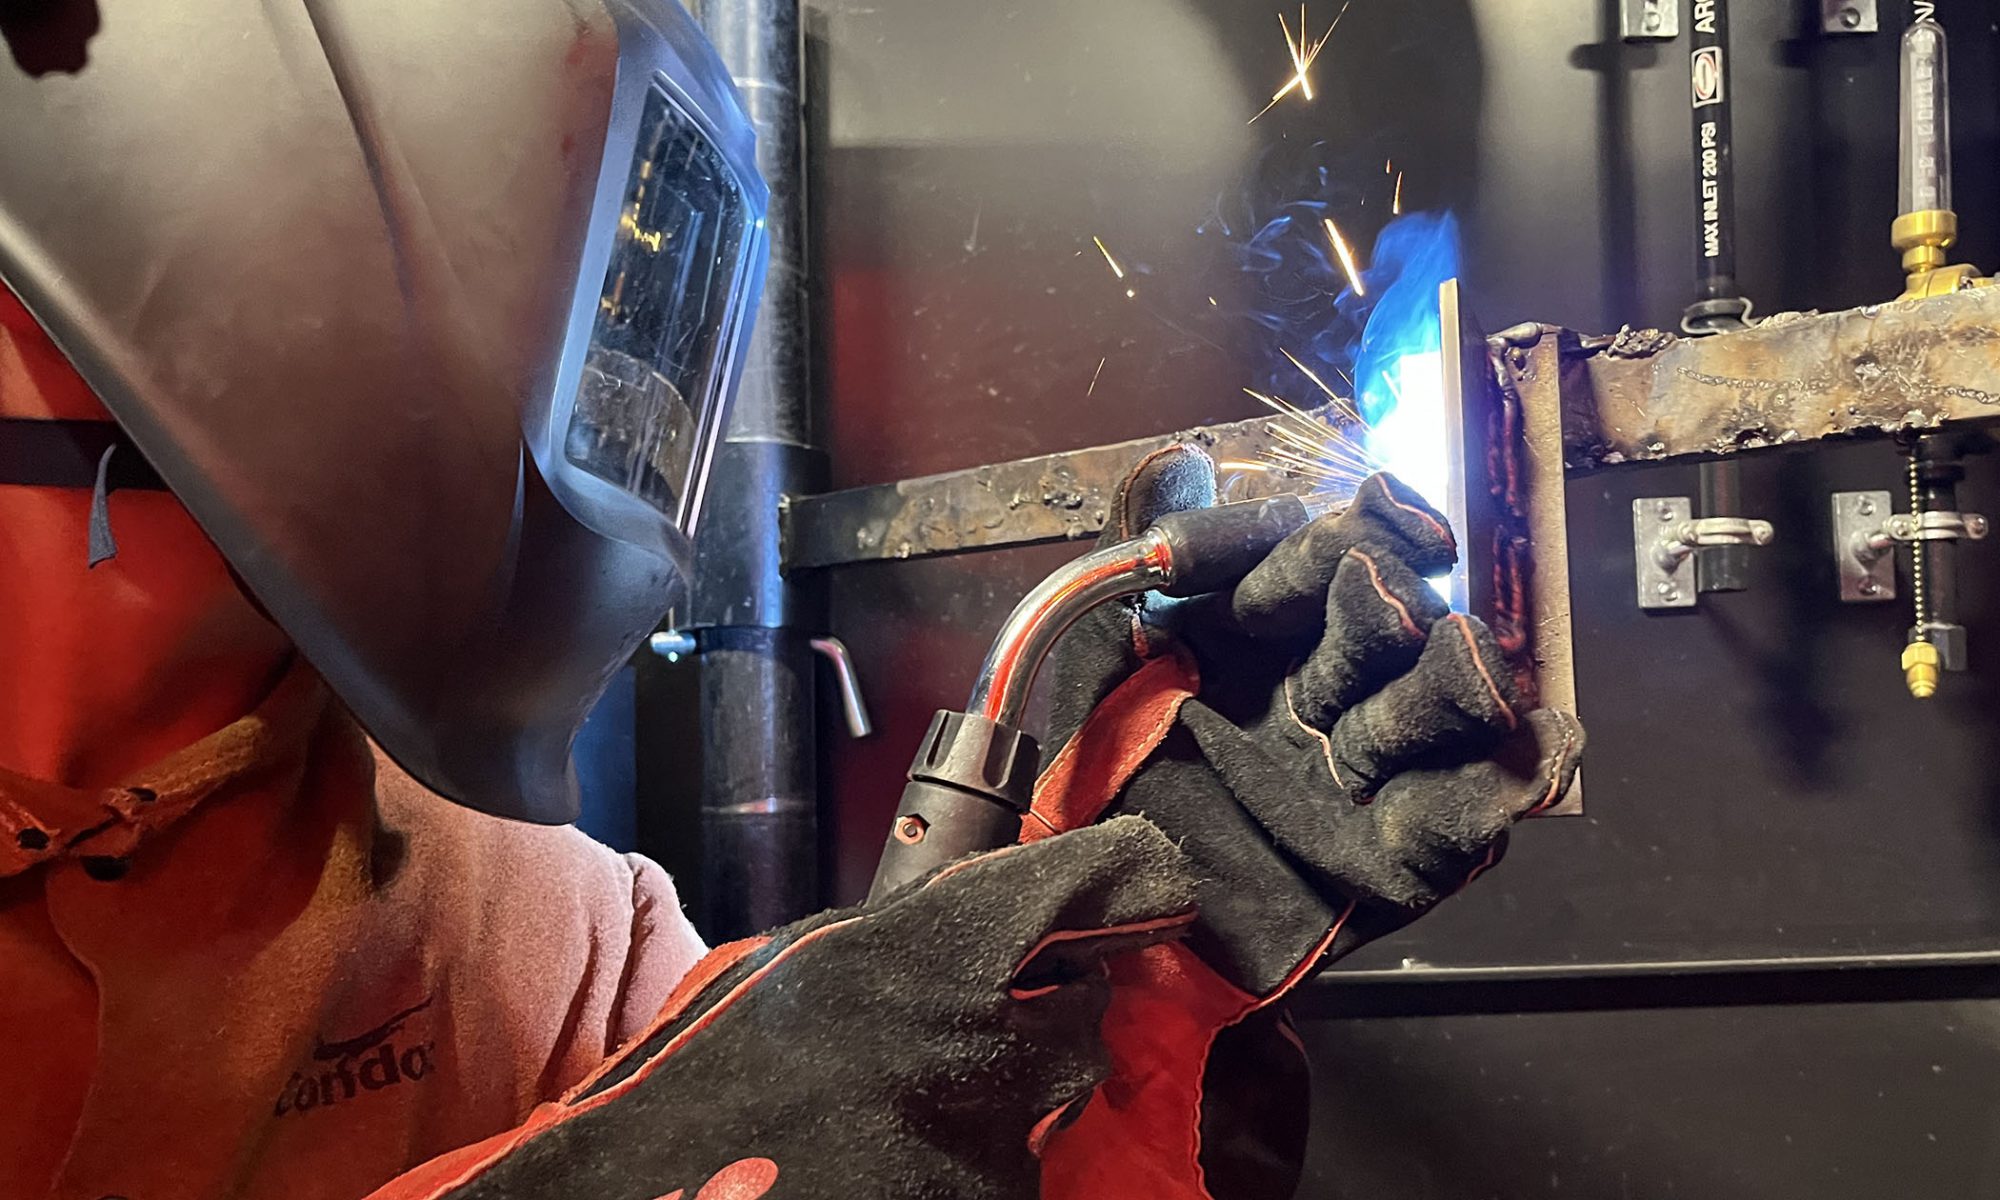 A student covered by a welder's mask and safety gear ignites uses his torch to piece together his metalwork.